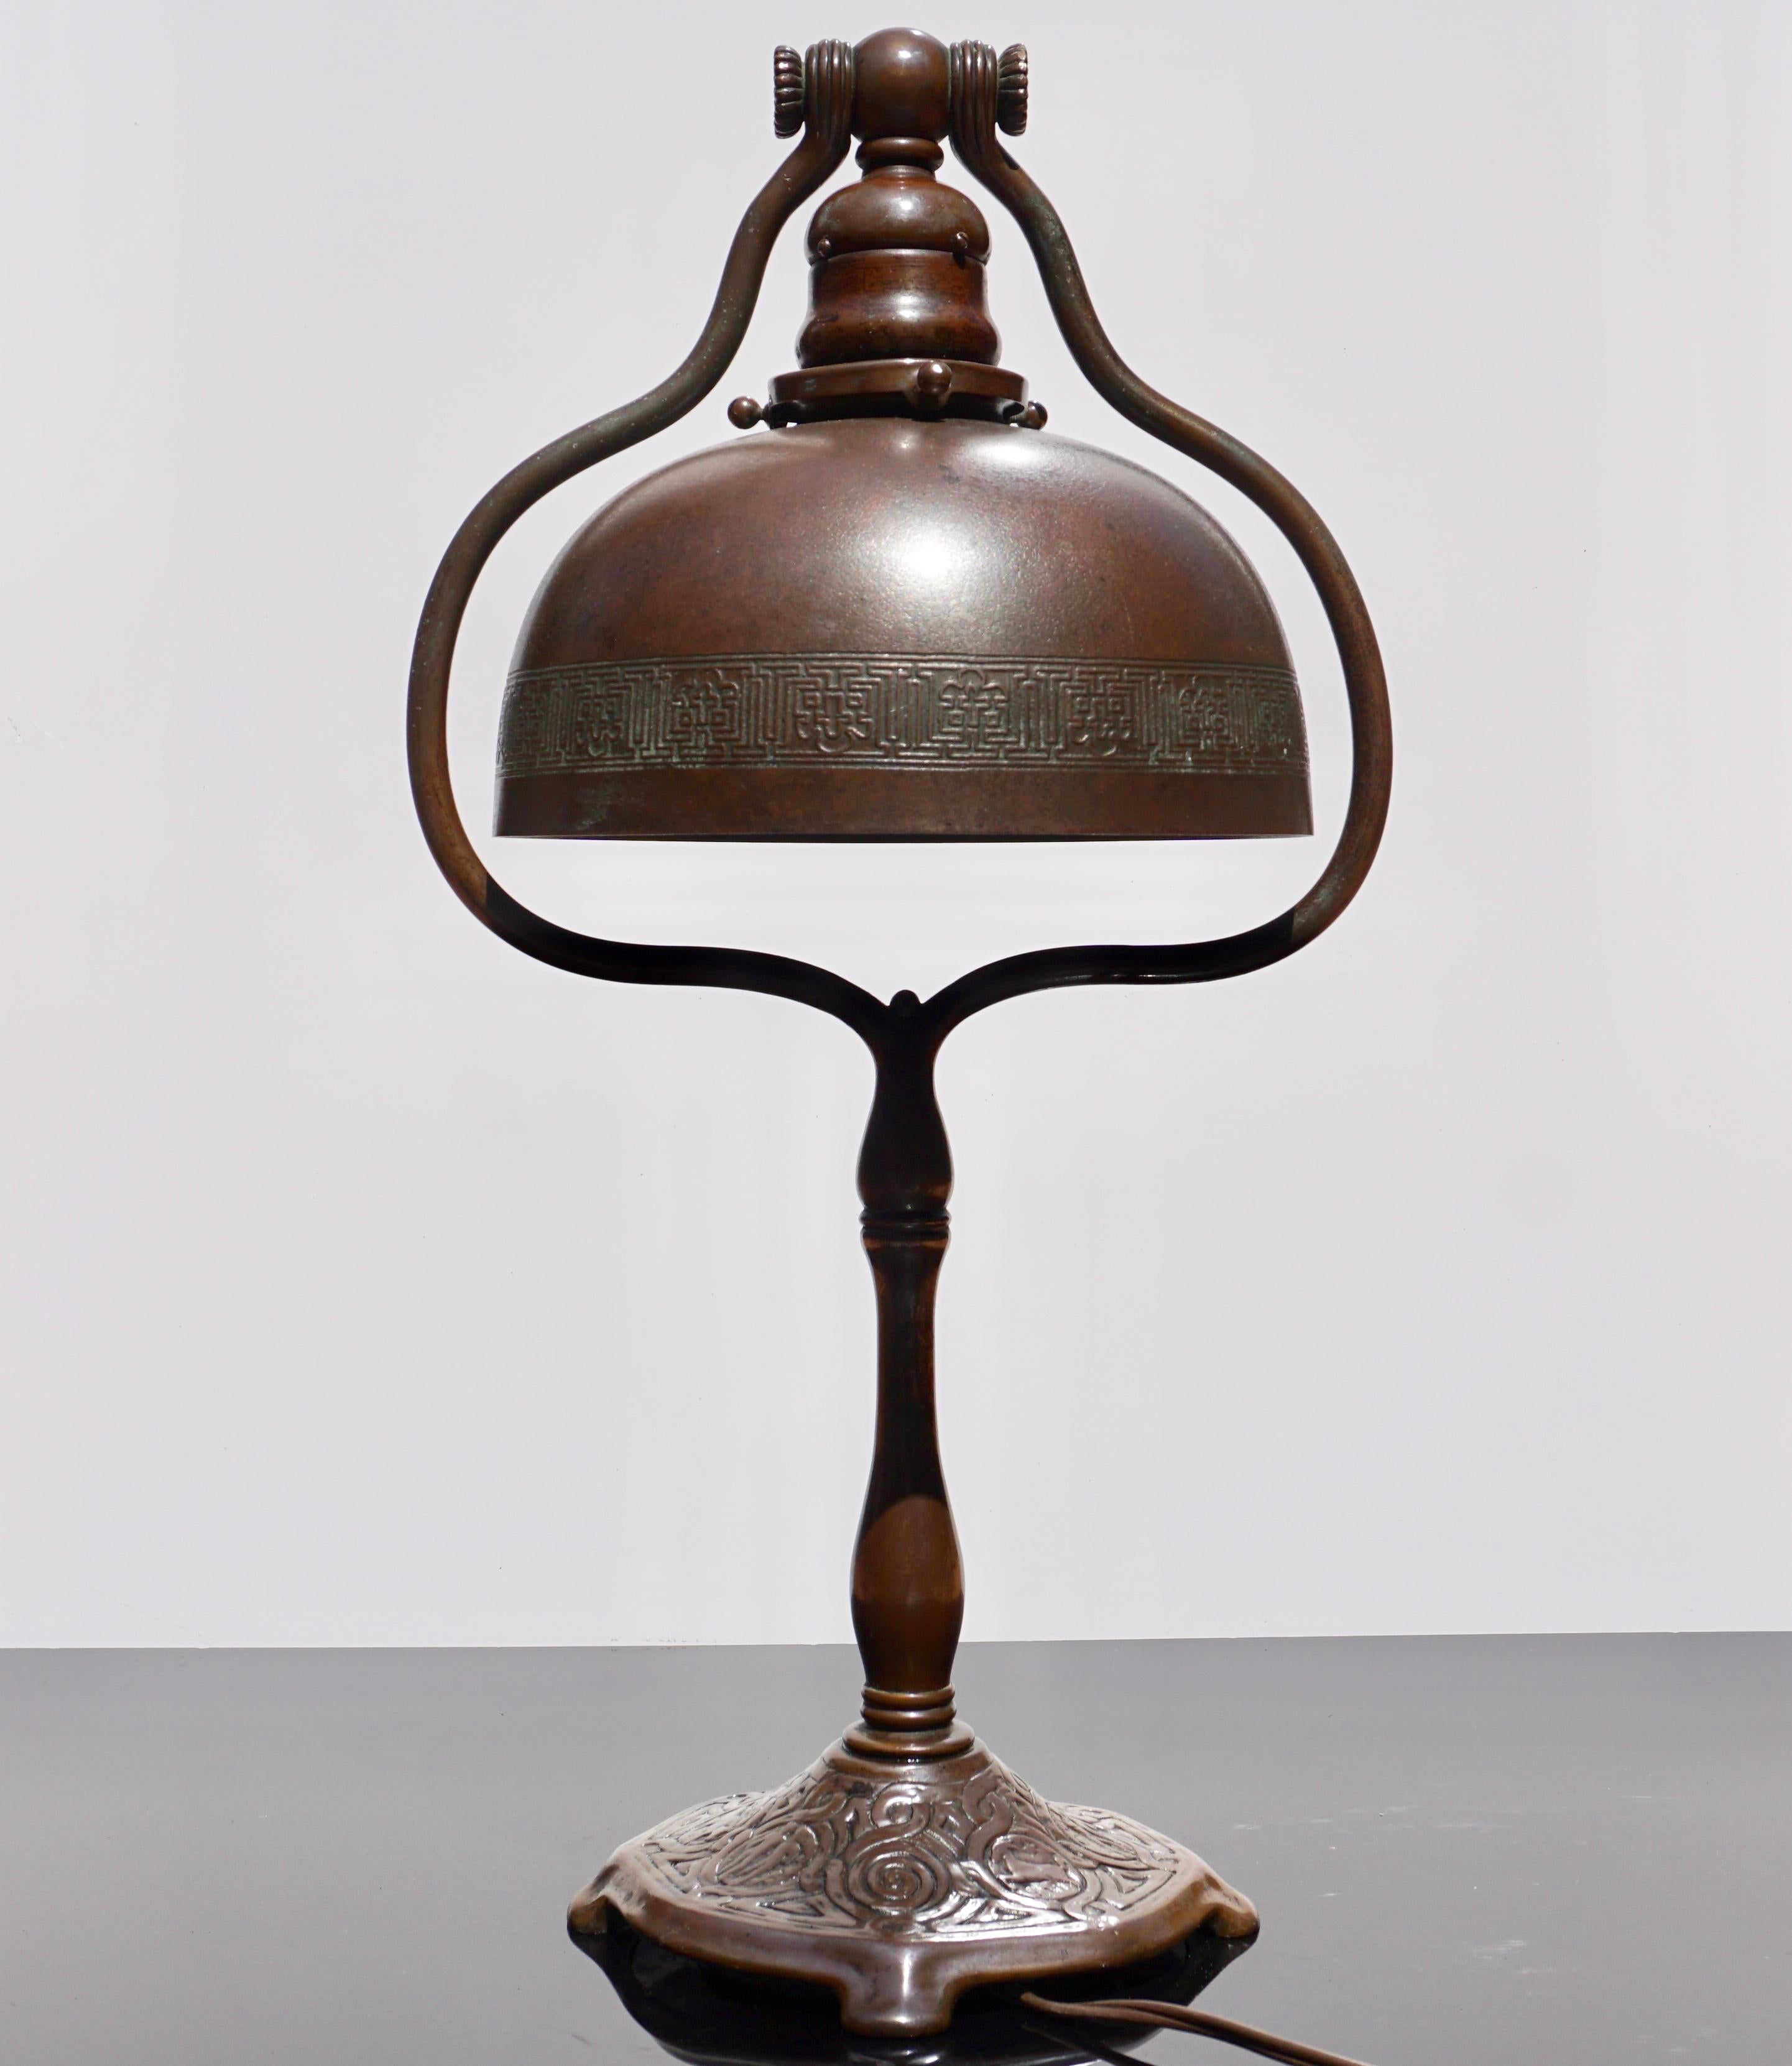 A wonderful Art Nouveau chocolate brown patinated bronze decorated desk lamp, circa 1918. A staple Tiffany Studios tall harp design with shade and base properly signed. Perfect for your studio, office, living room or bedroom! Wonderful antique